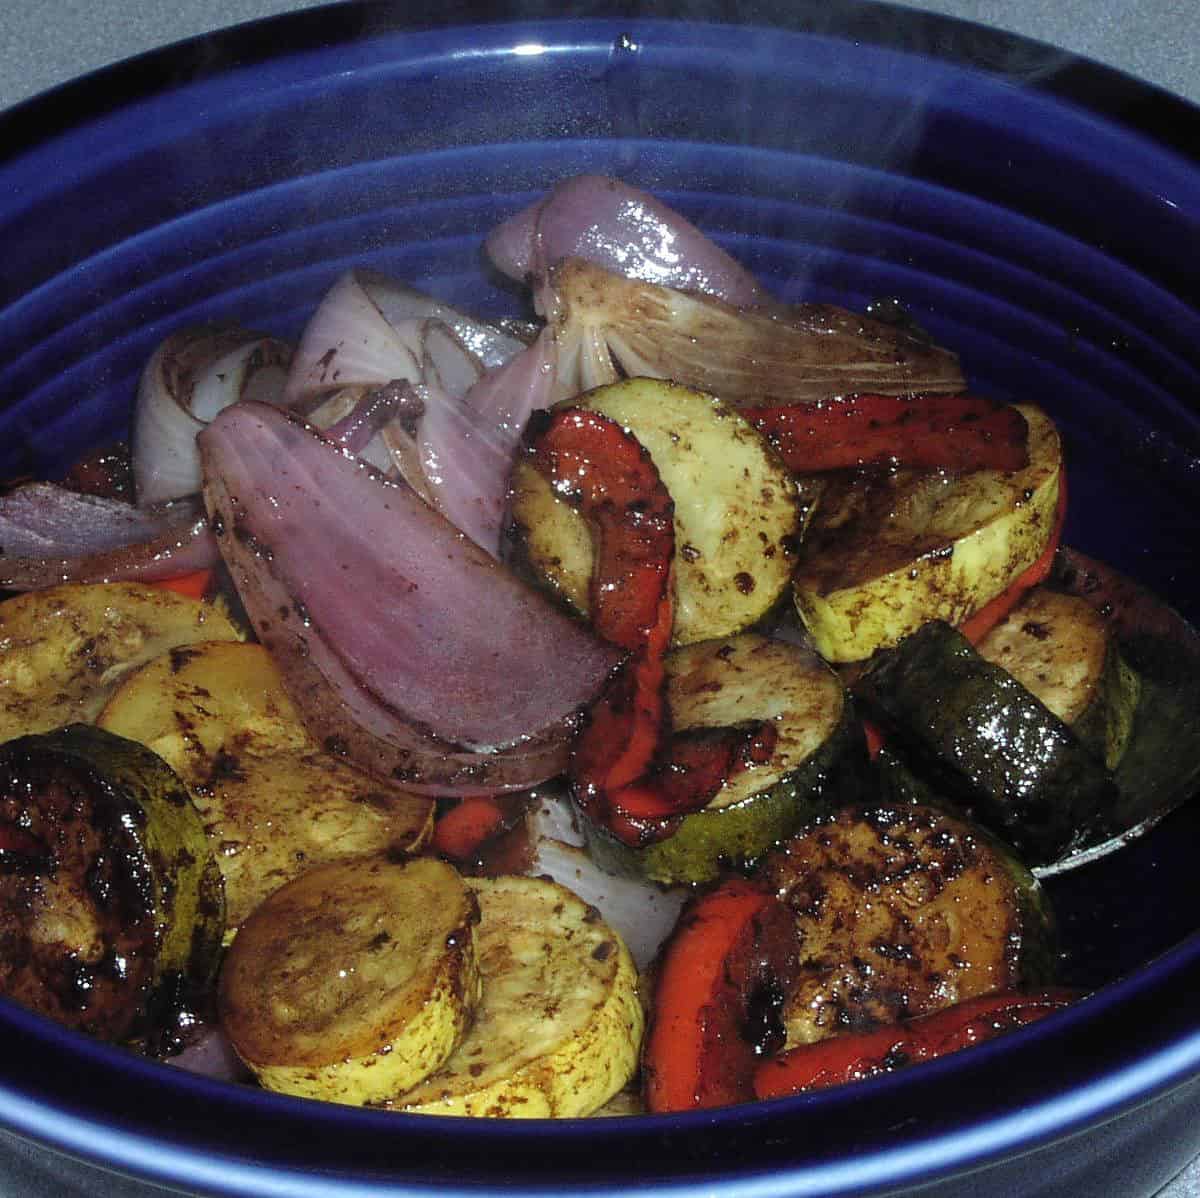 Flavorful and Healthy Smoked Vegetables Dish